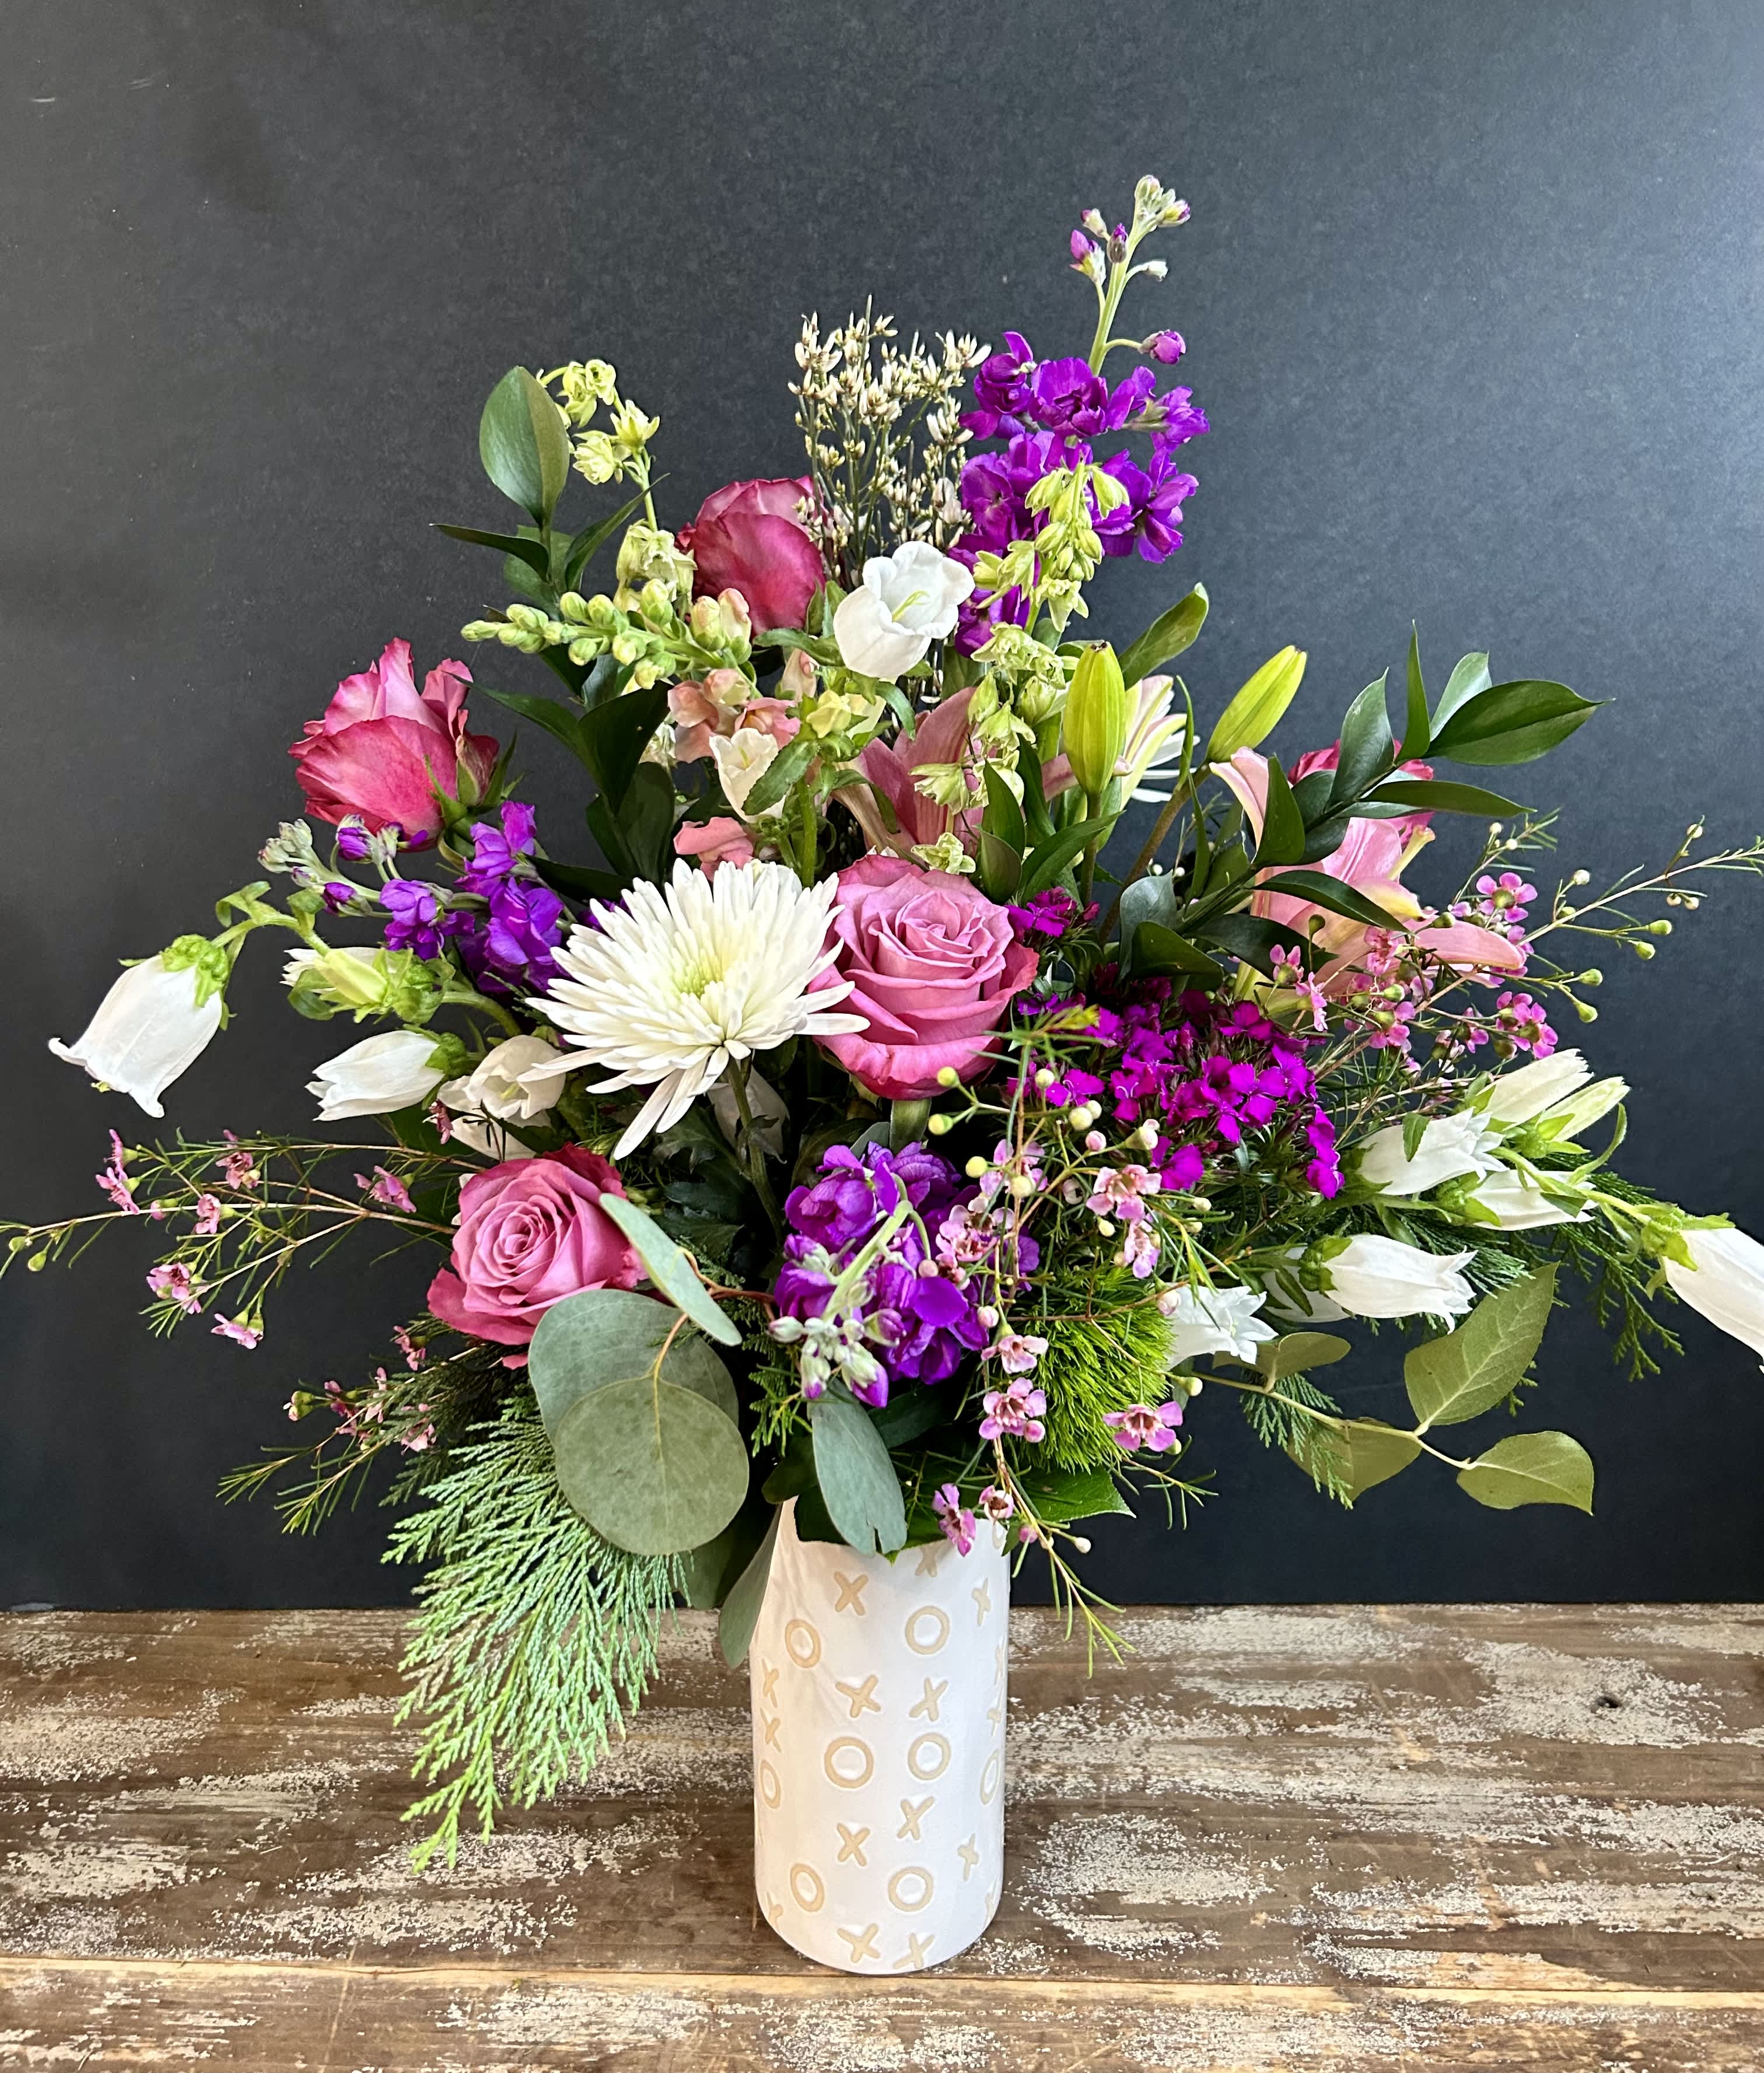 X's &amp; O's - An adorable ceramic keepsake vase is etched with so many X's and O's. The mixed arrangement will include a mix of fragrant flowers, fillers, eucalyptus and more. 